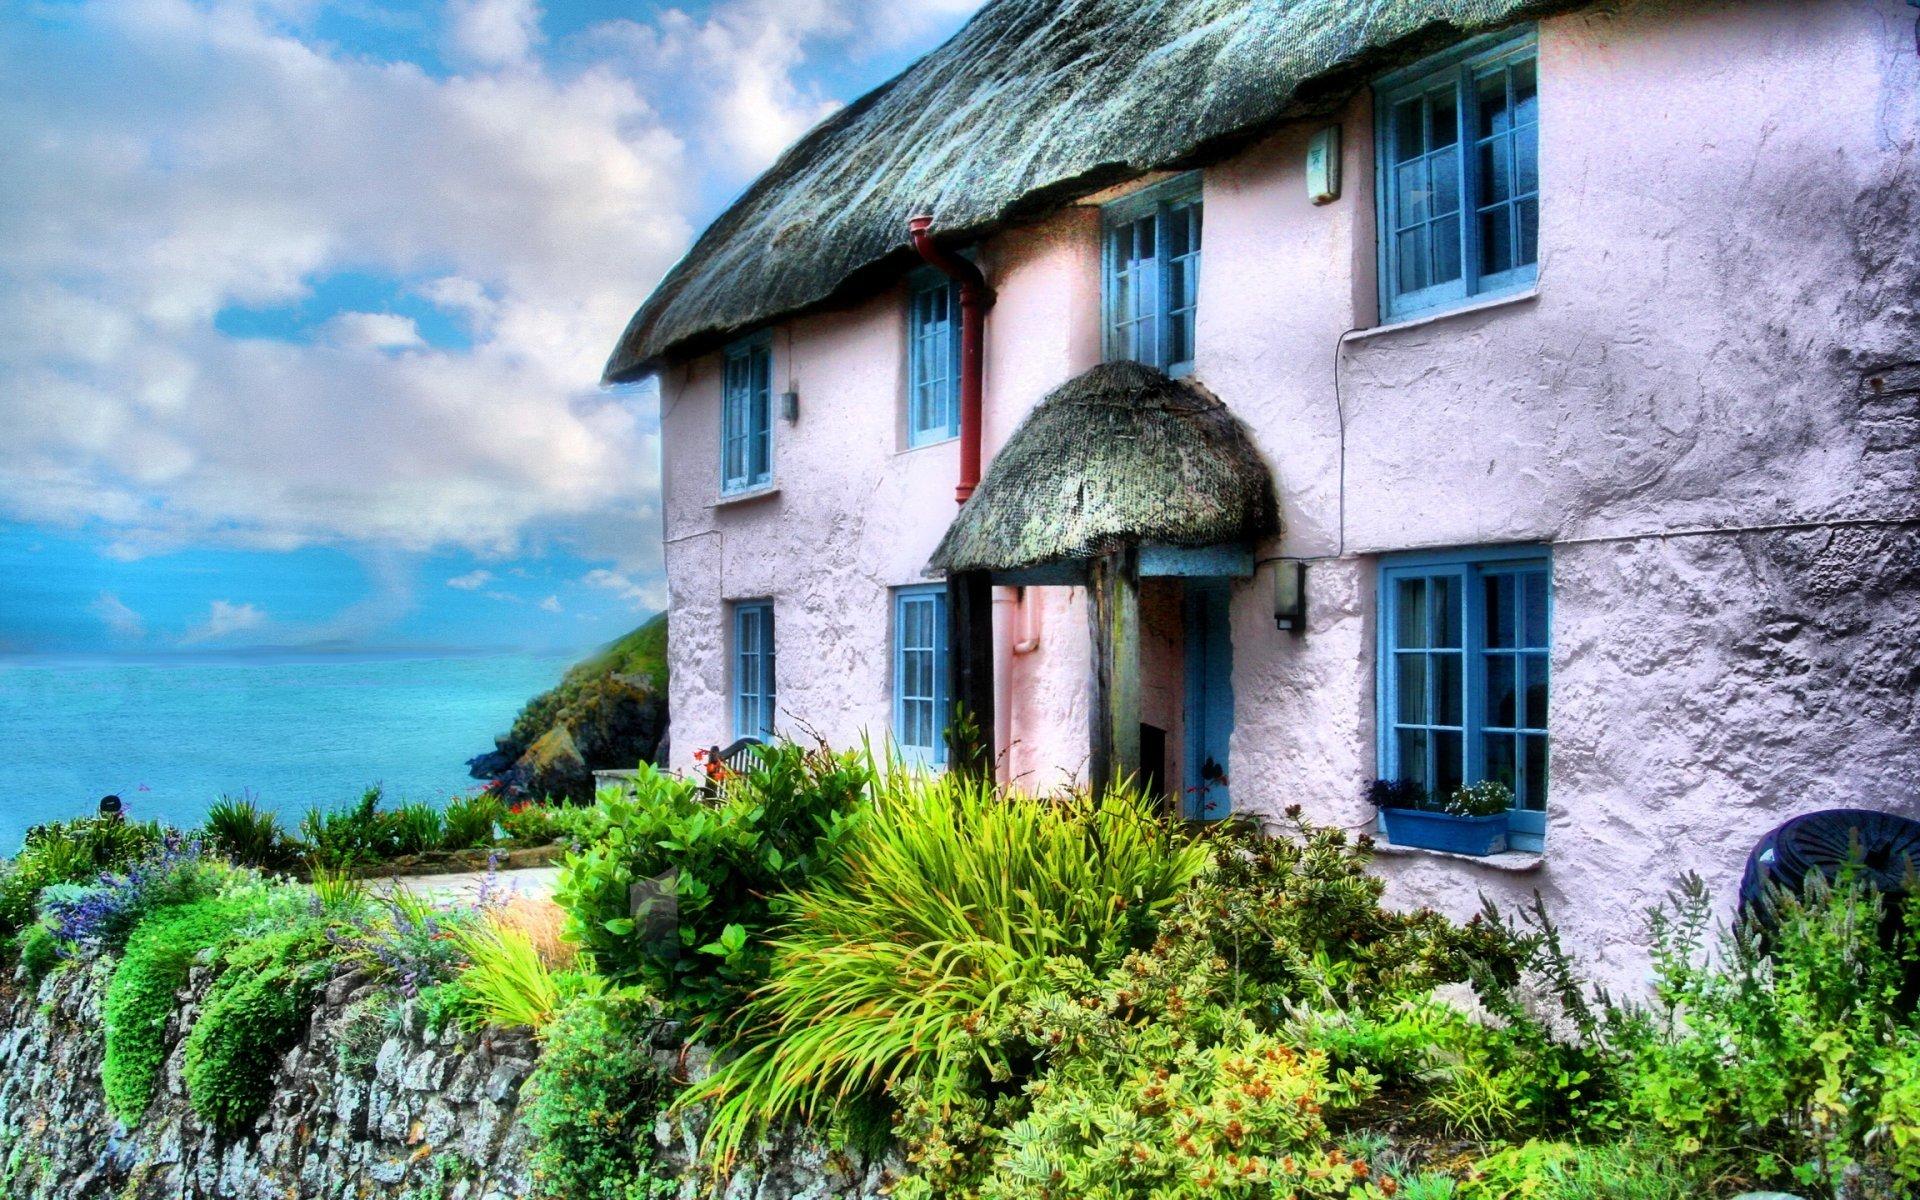 Cottage in Cornwall, England HD Wallpaper. Background Image